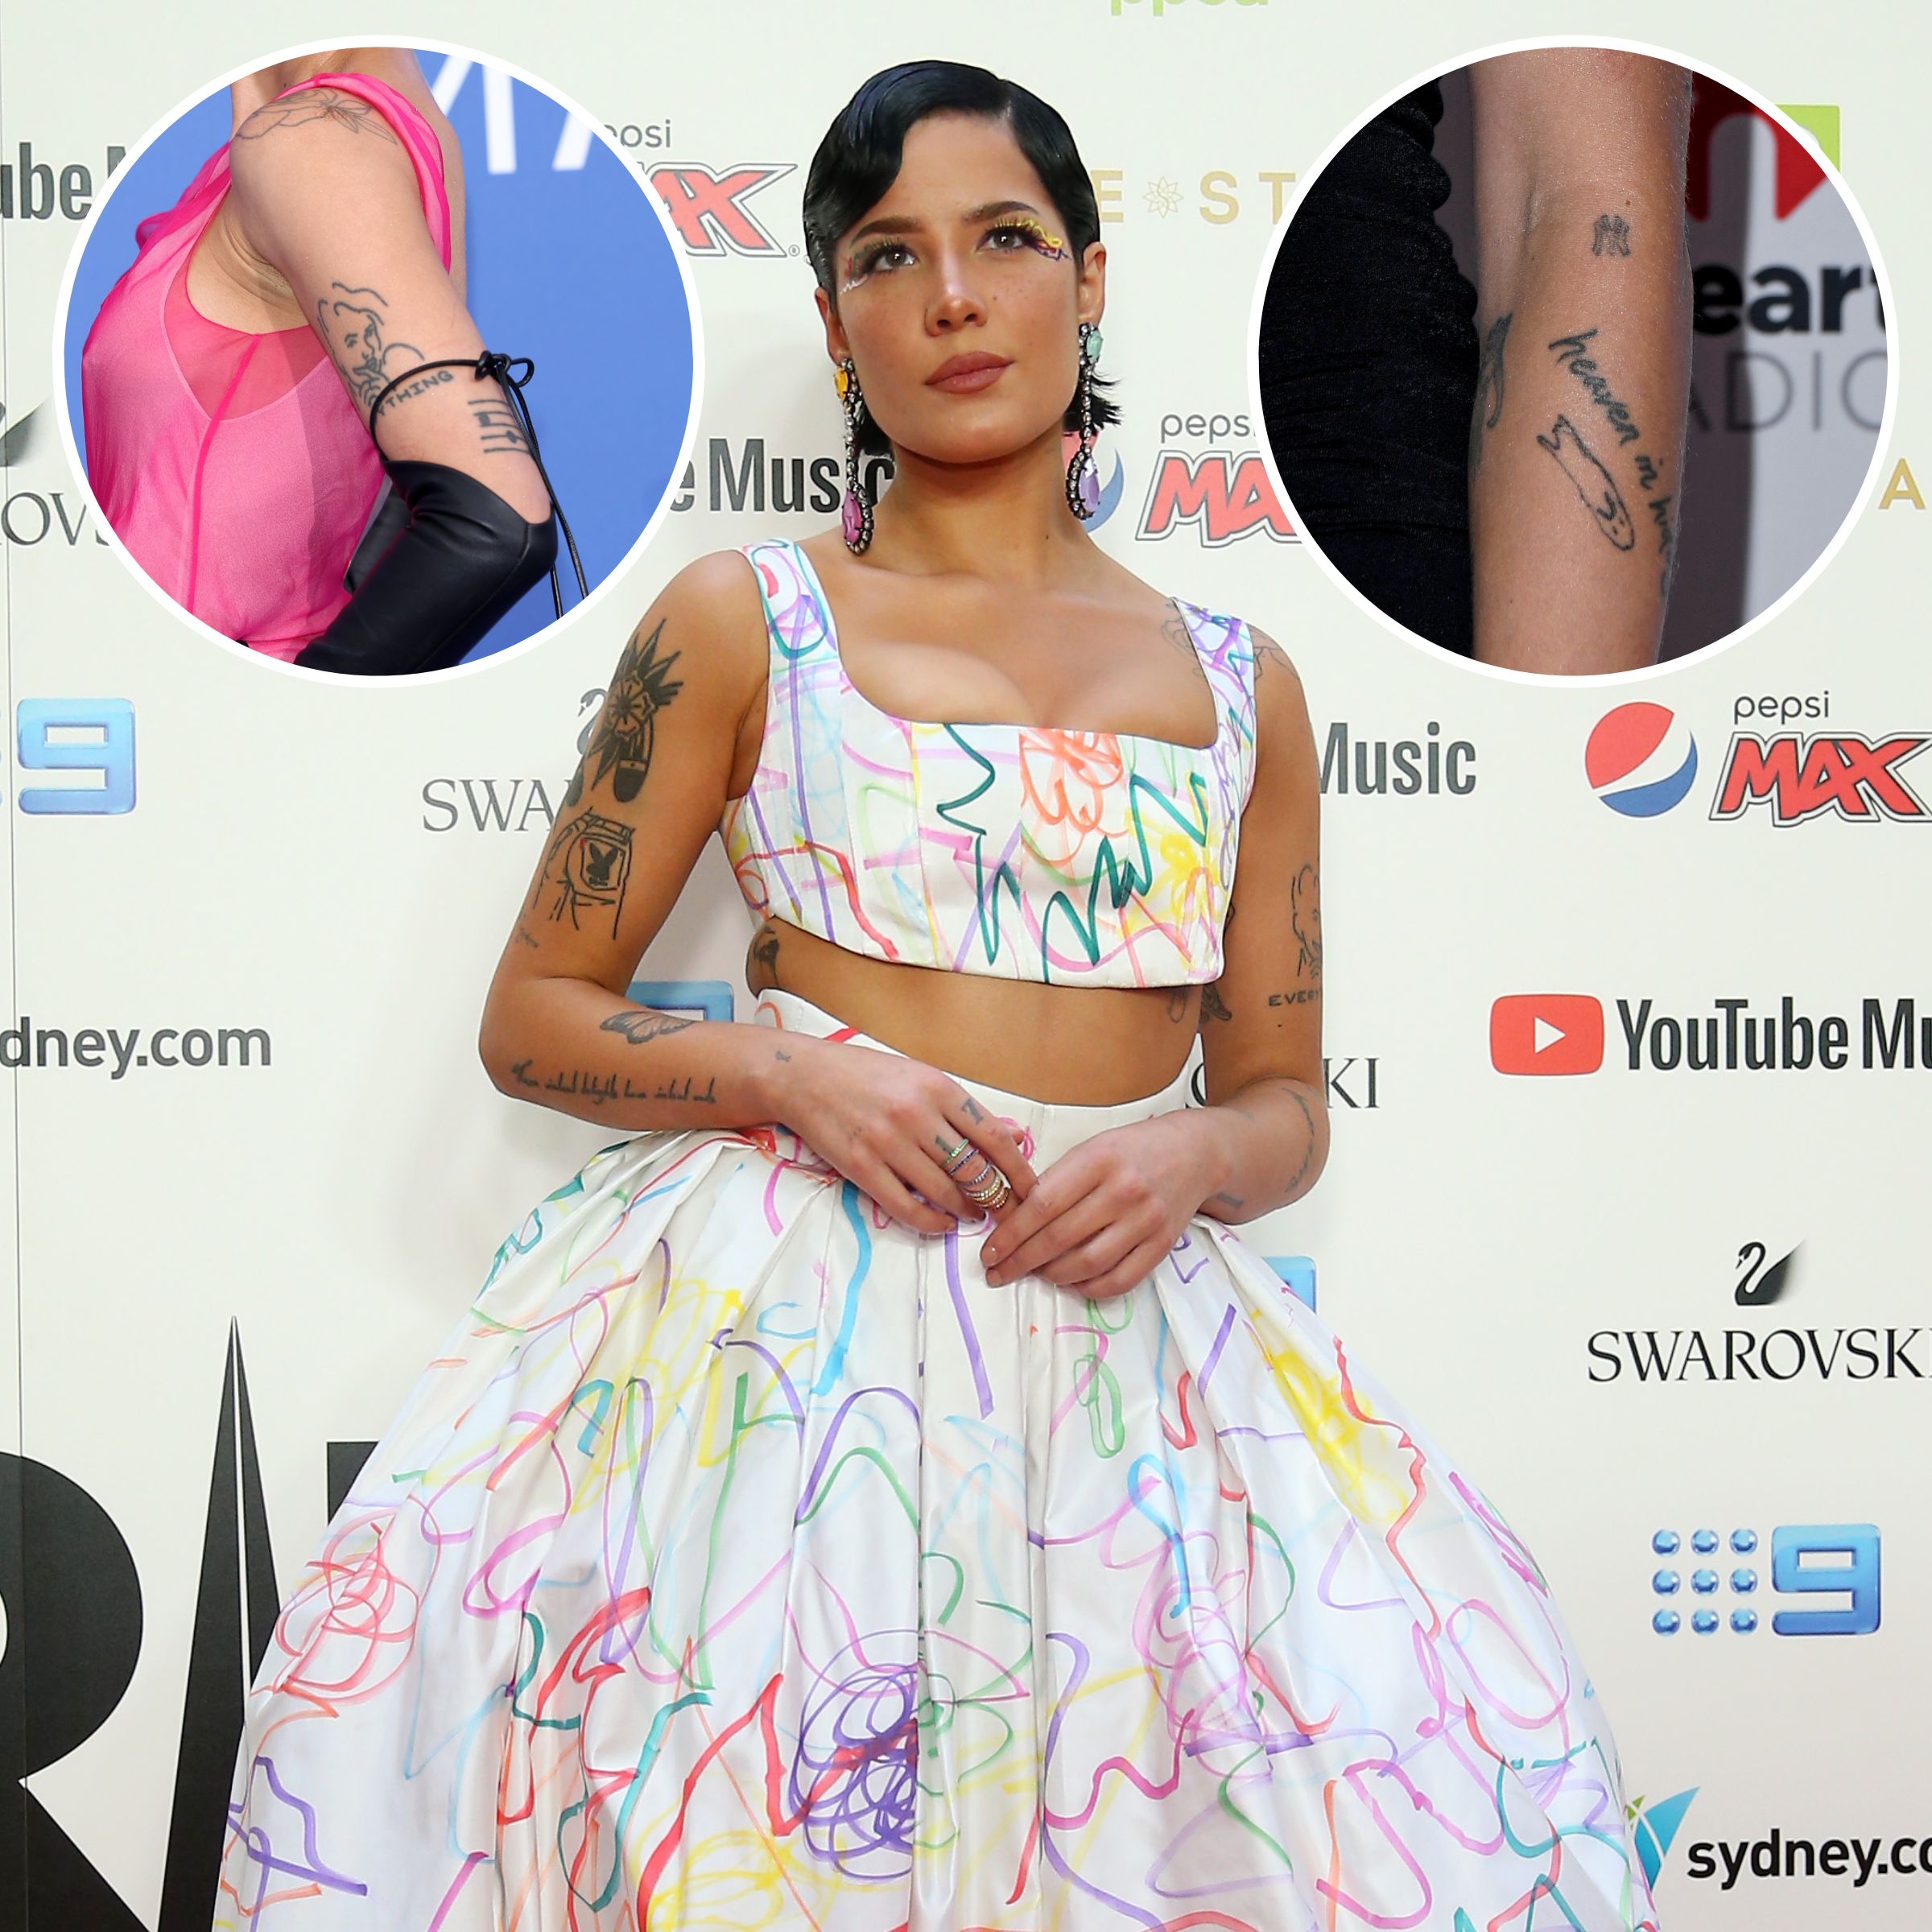 Knife tattoo on Halsey. | Halsey style, Halsey, Gender neutral outfits